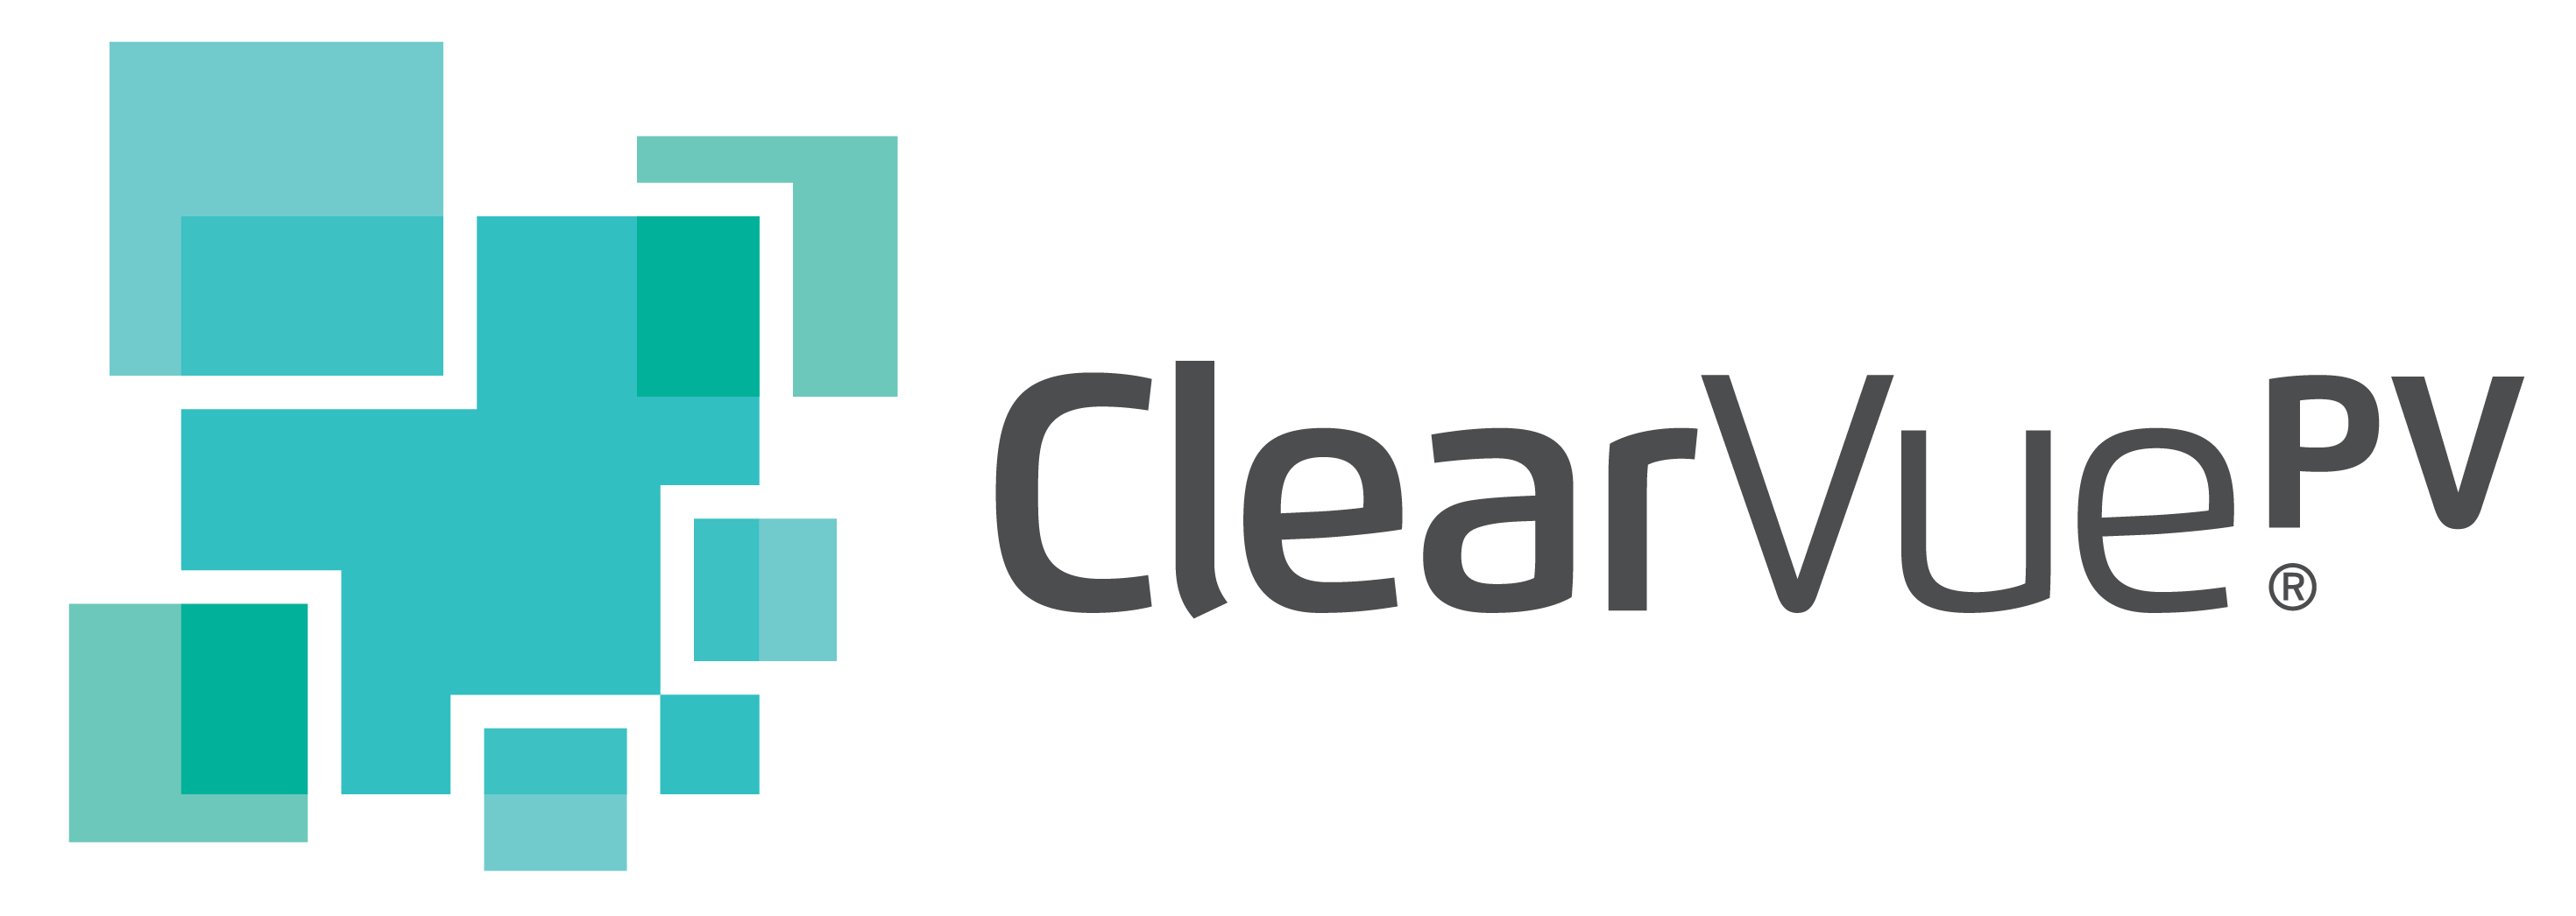 Two-Year Study Confirms 40% Energy Use Offset Provided by ClearVue ...